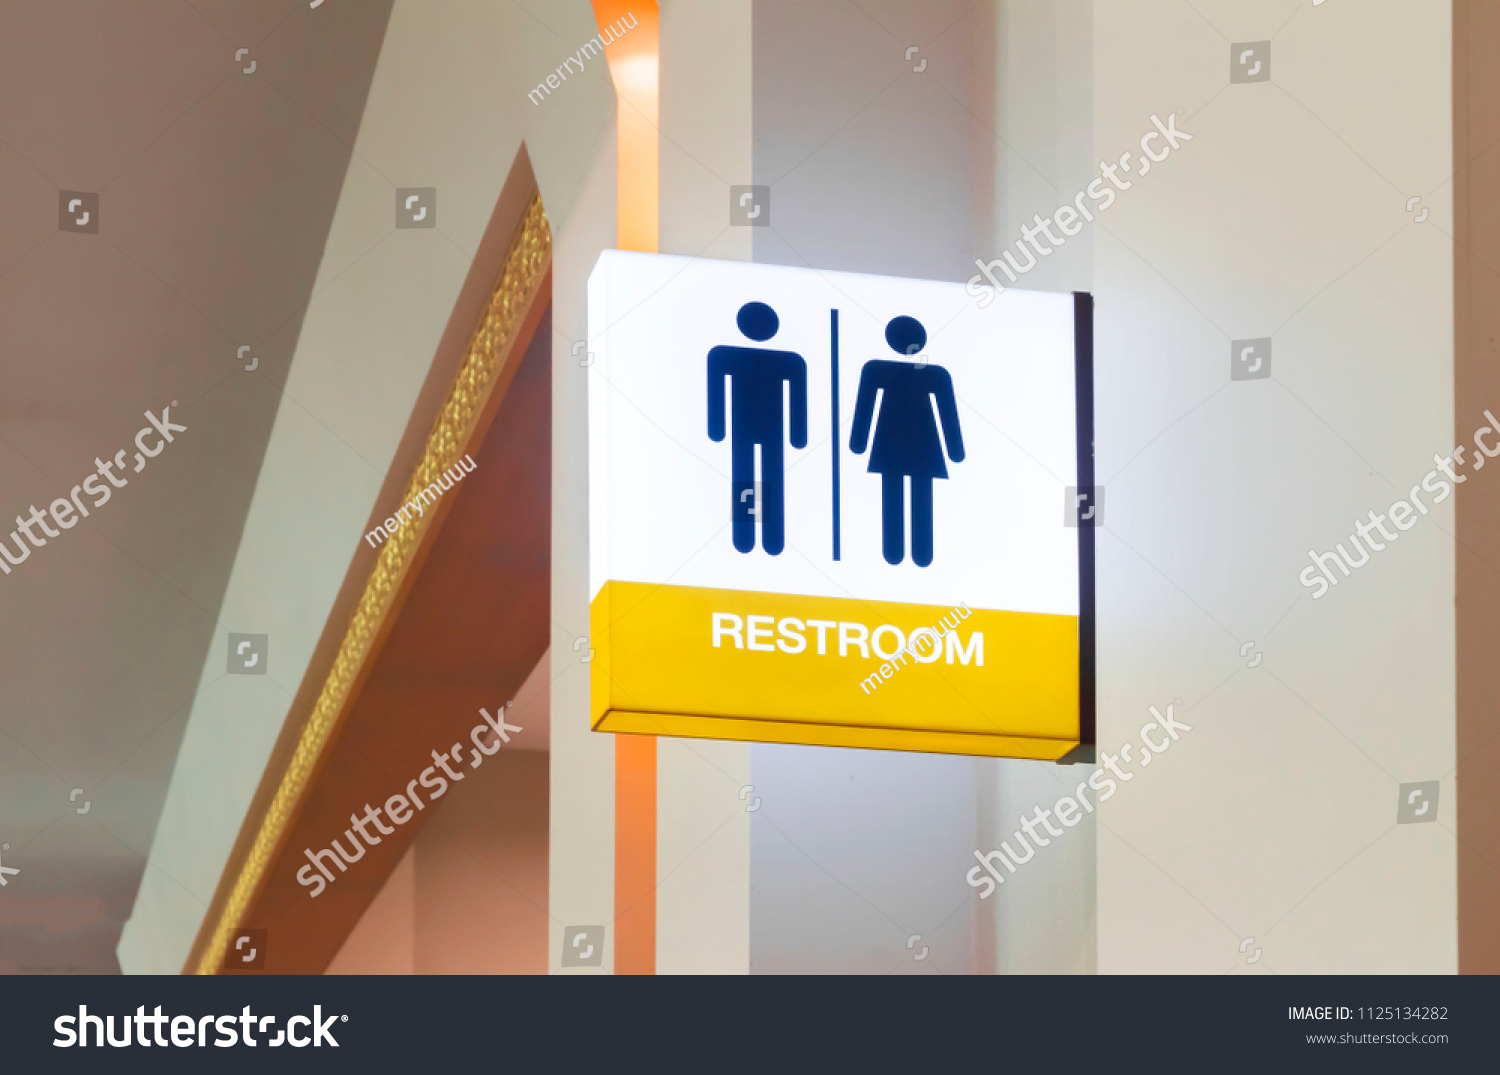 Restroom sign or toilet sign made of electric light box with man and woman icon set  symbol on white concrete wall background, modern, hygiene and clean restroom concept
 #1125134282